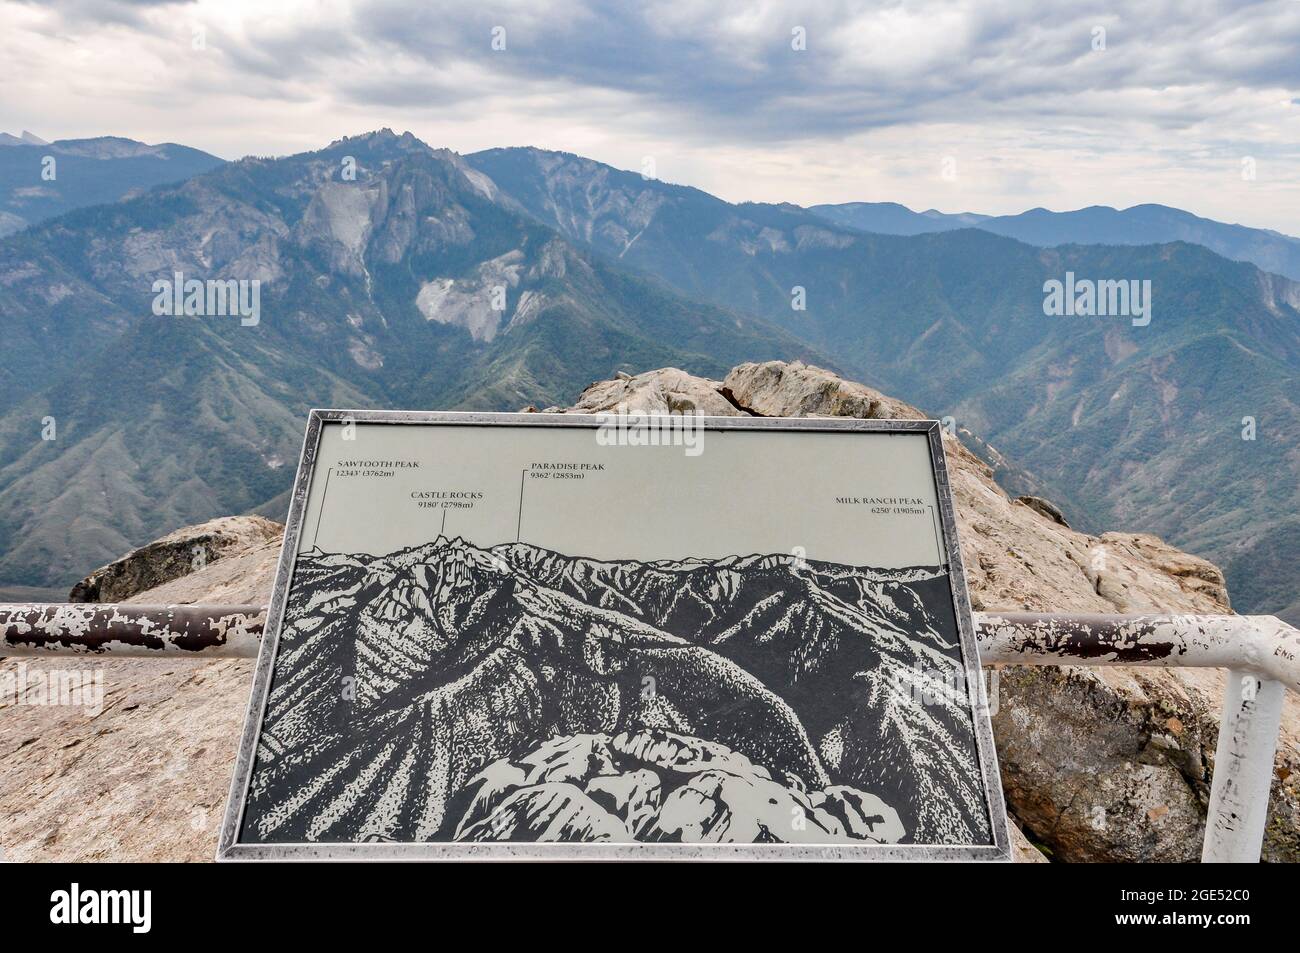 Informational sign at the top end of the Moro Rock trail pointing out Sawtooth Peak, Castle Rocks, Paradise Peak, and Milk Ranch Peak for hikers. Stock Photo